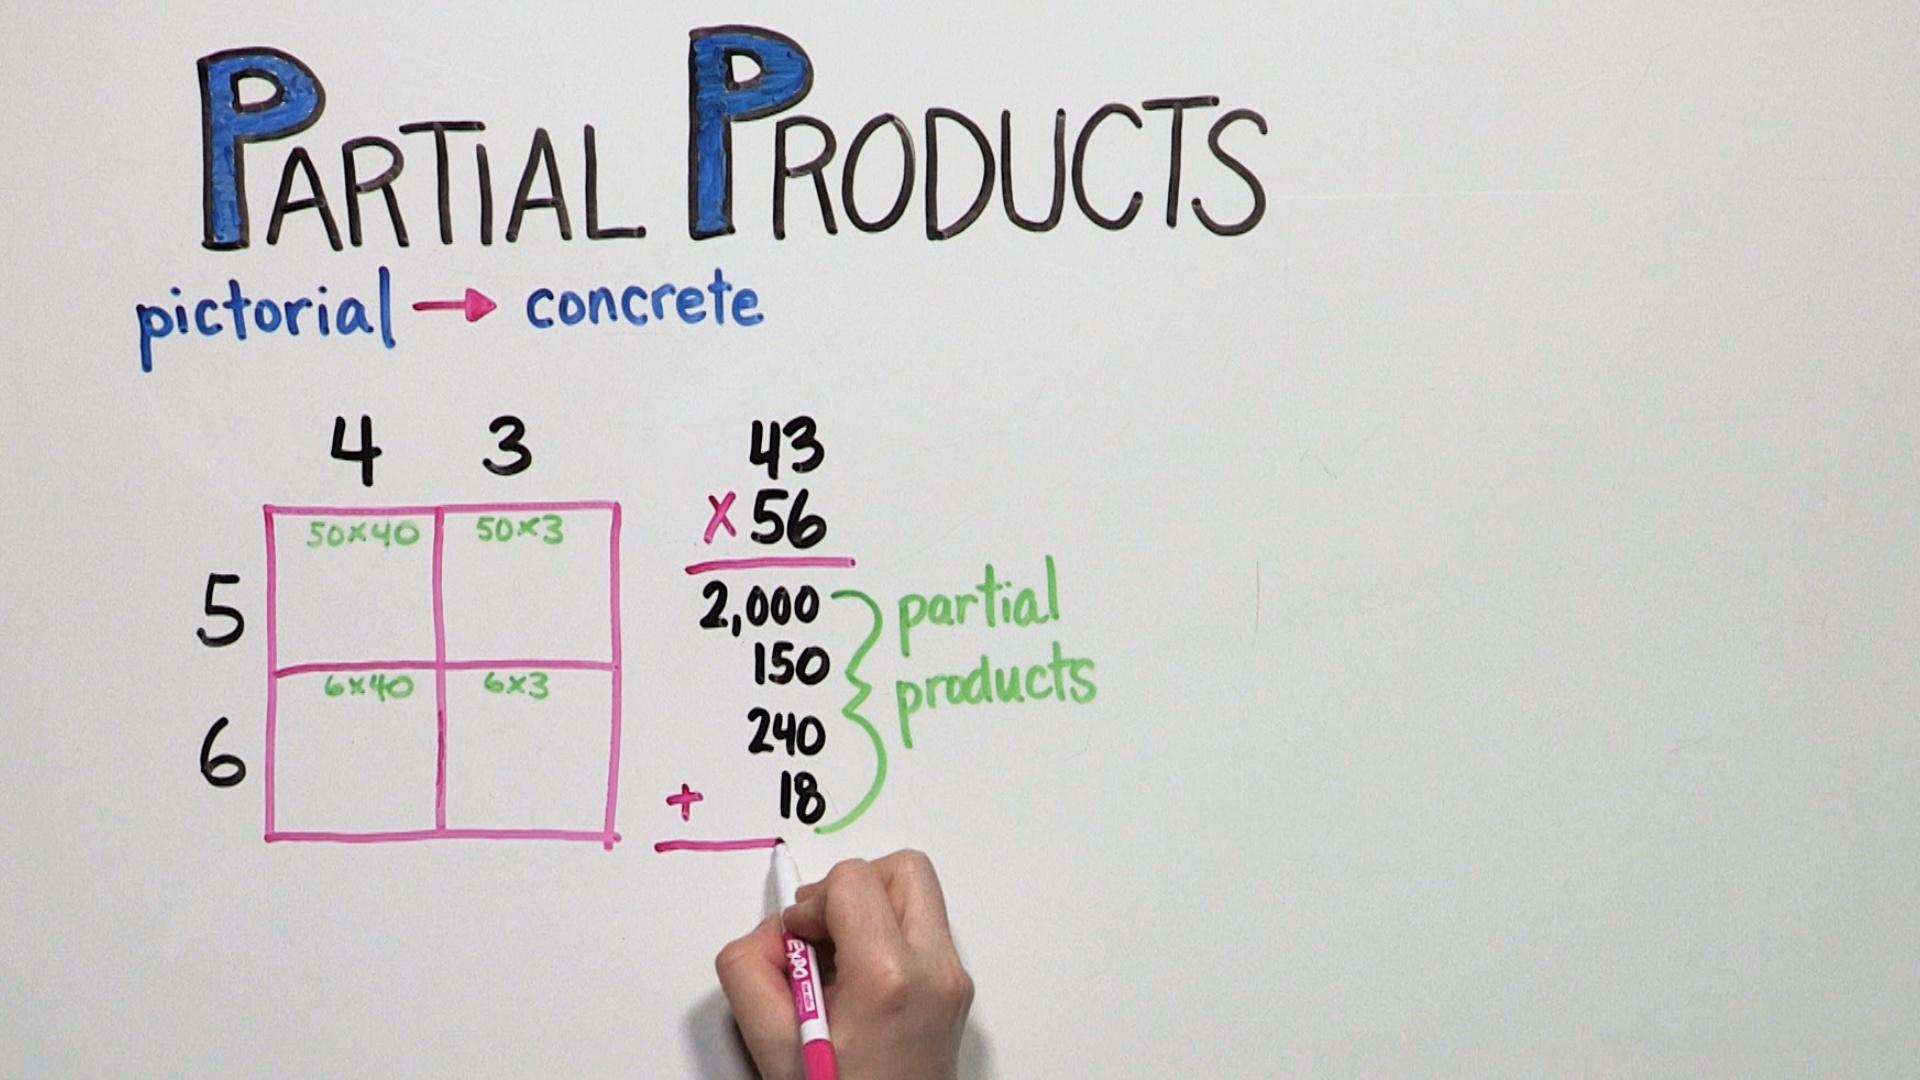 partial-products-grade-4-good-to-know-pbs